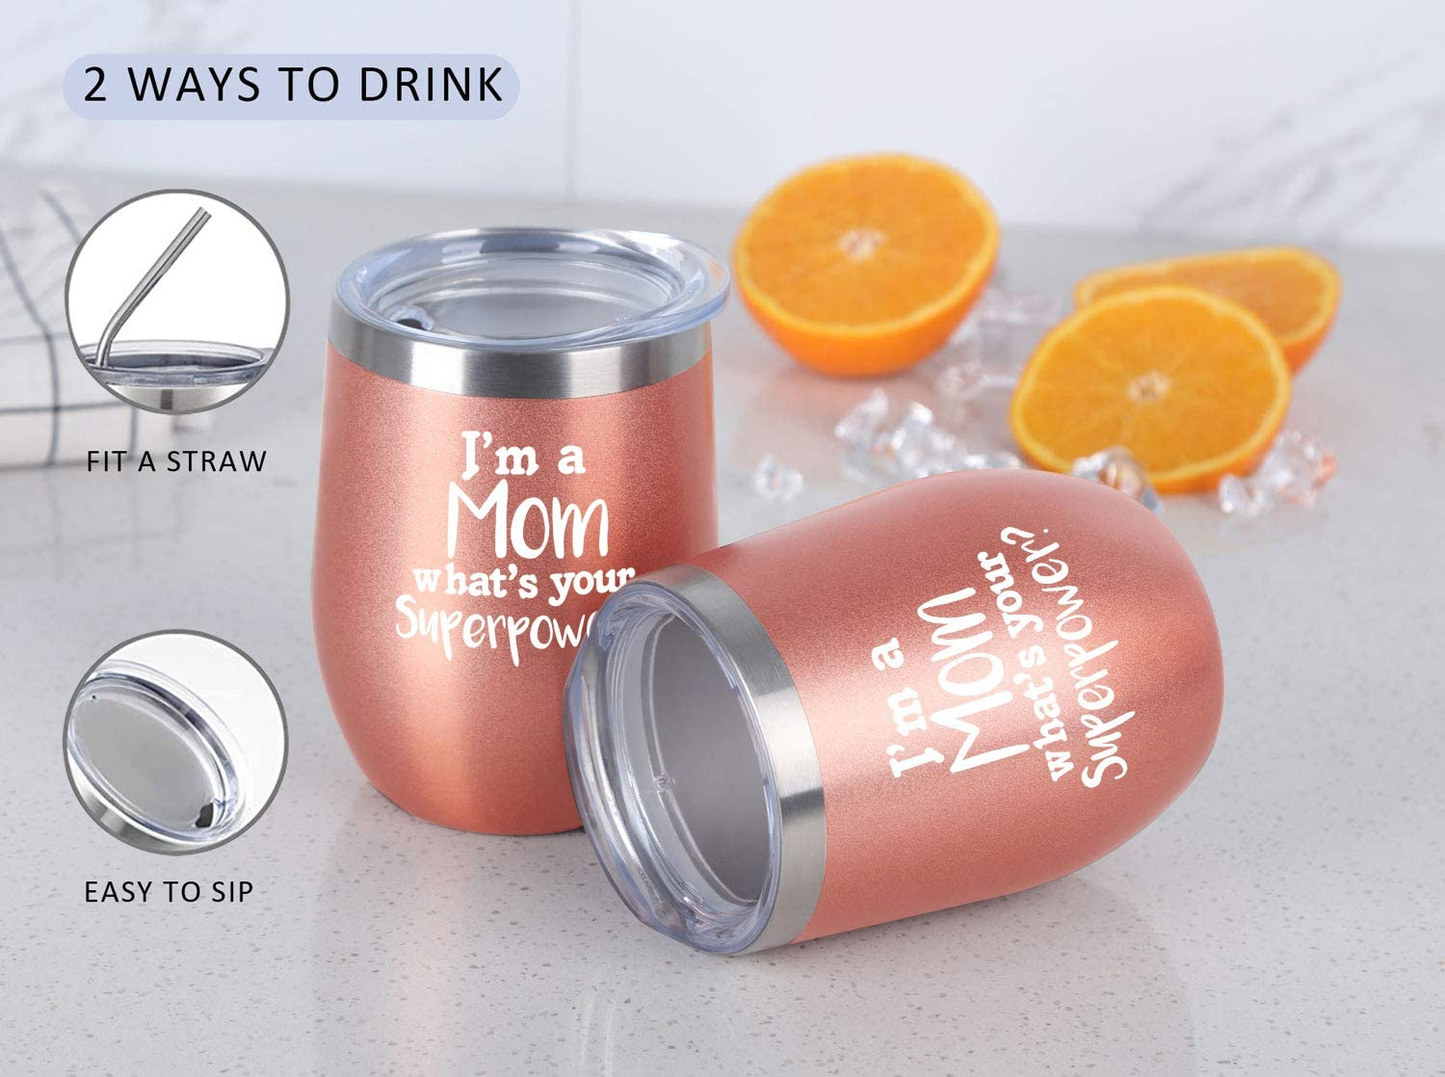 I'M a Mom What'S Your Superpower Mom Wine Tumbler, Mom Gifts 12 Oz Wine Tumbler, Funny Mother'S Day Gifts for Mom Mother in Law Mom to Be Grandma Her, Insulated Stainless Steel Wine Tumbler